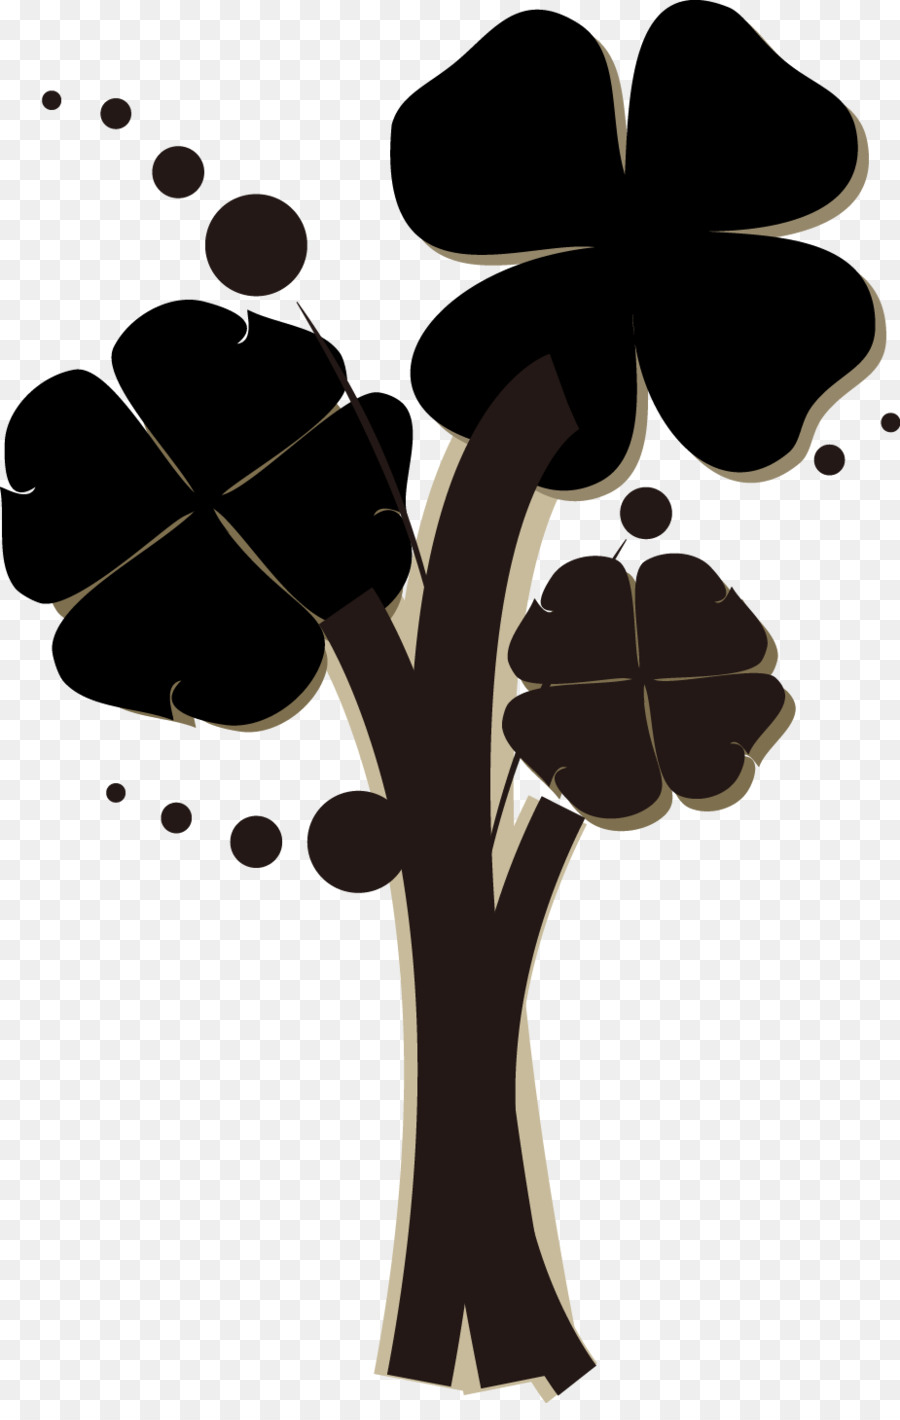 Four-leaf clover - Clover painted cartoon png download - 925*1442 - Free Transparent Fourleaf Clover png Download.